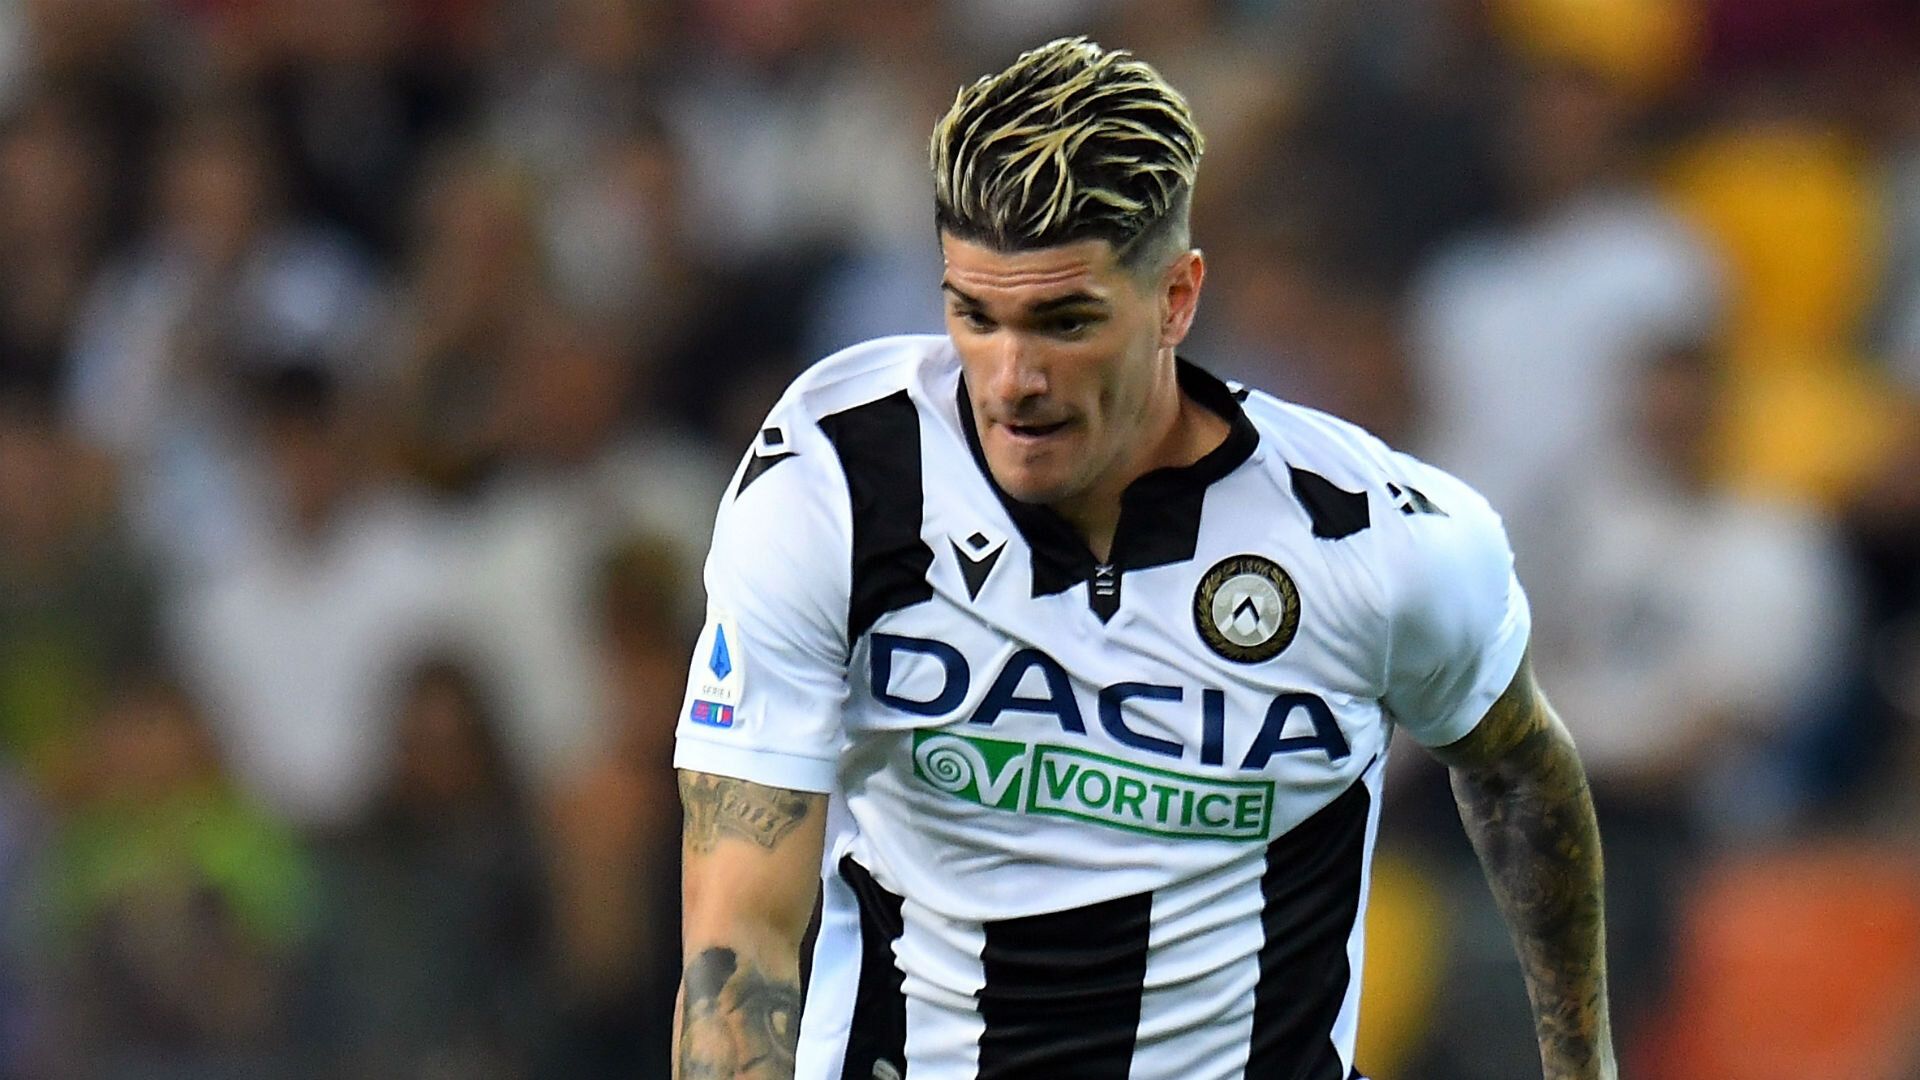 Udinese ready to sell De Paul but offers must be substantial